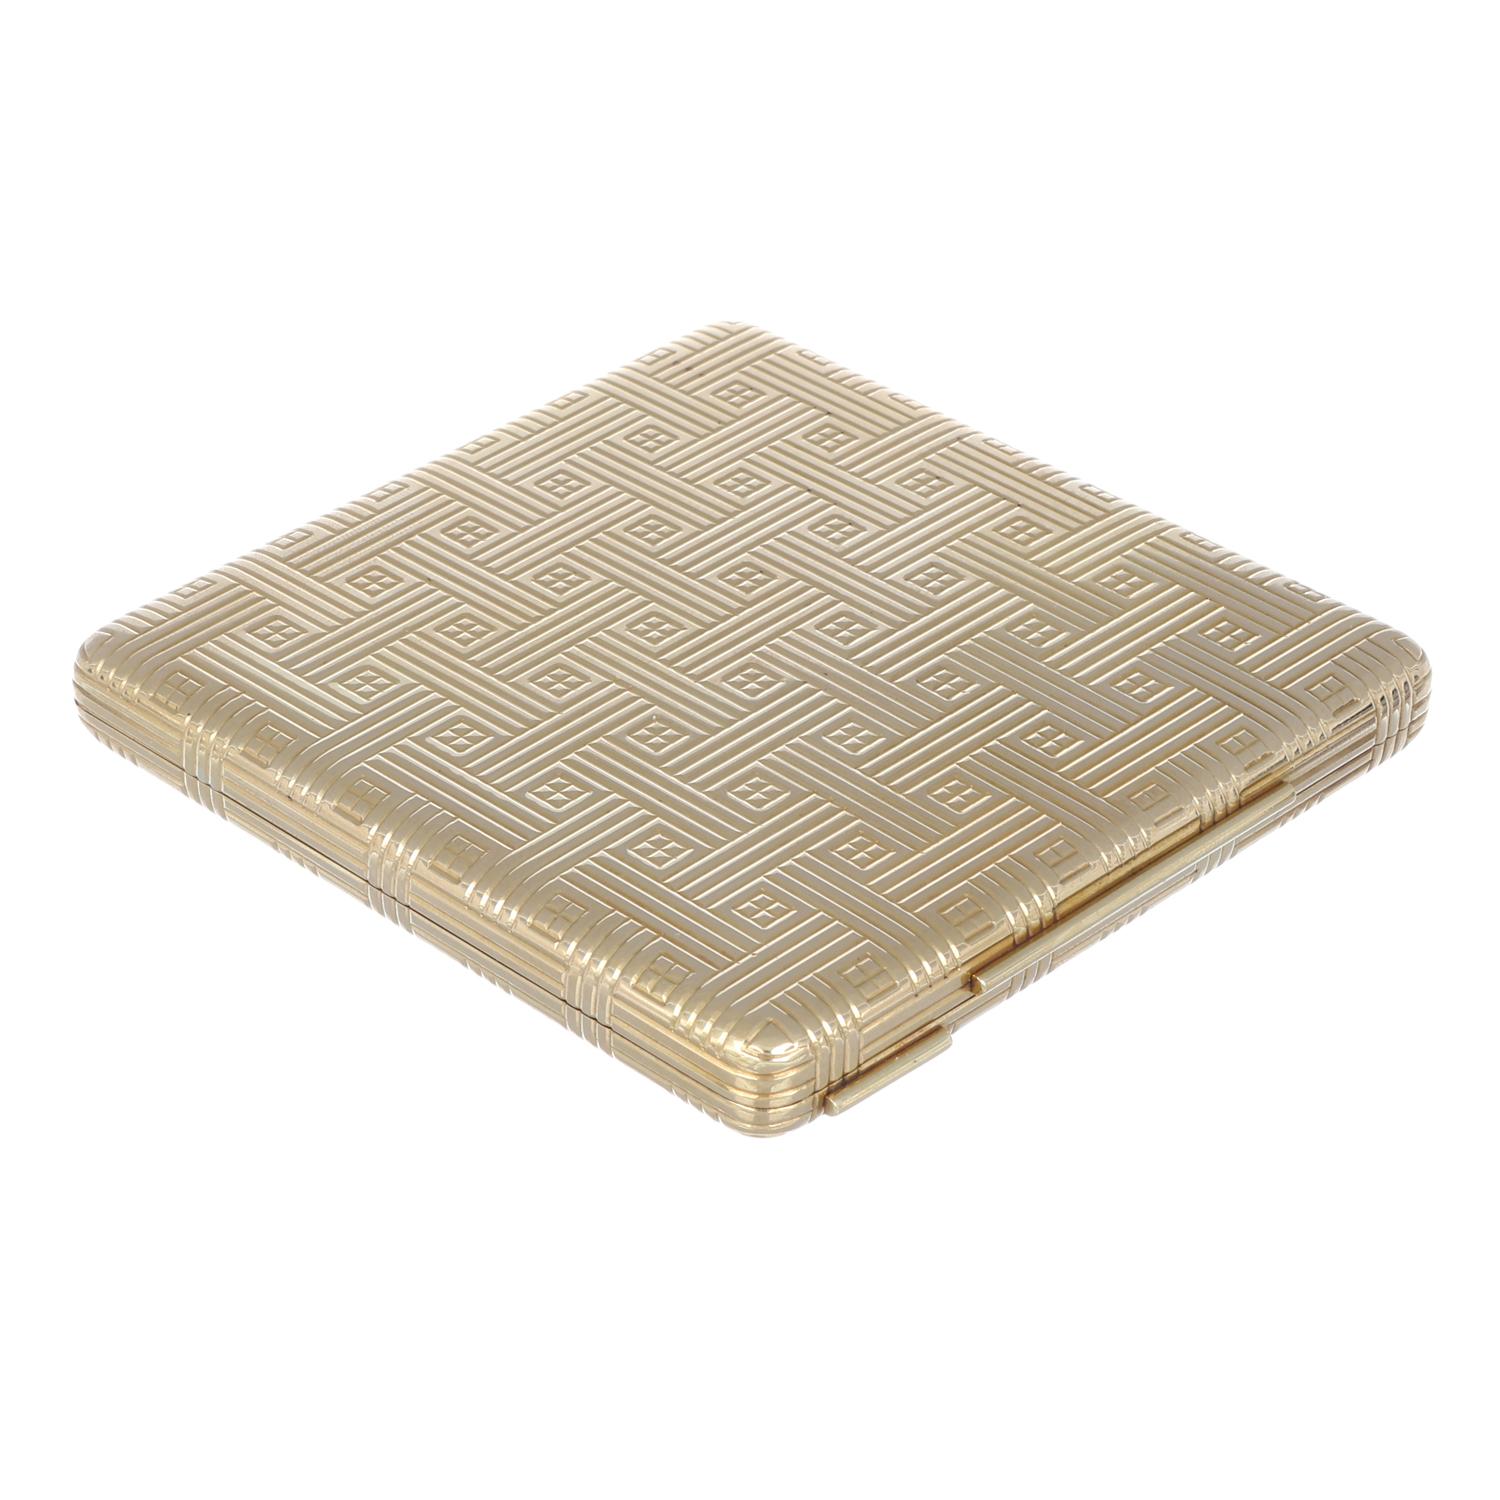 18Kt Gold Rare Compact Powder Box - Made in Italy 1970 circa - Geometric Pattern For Sale 5